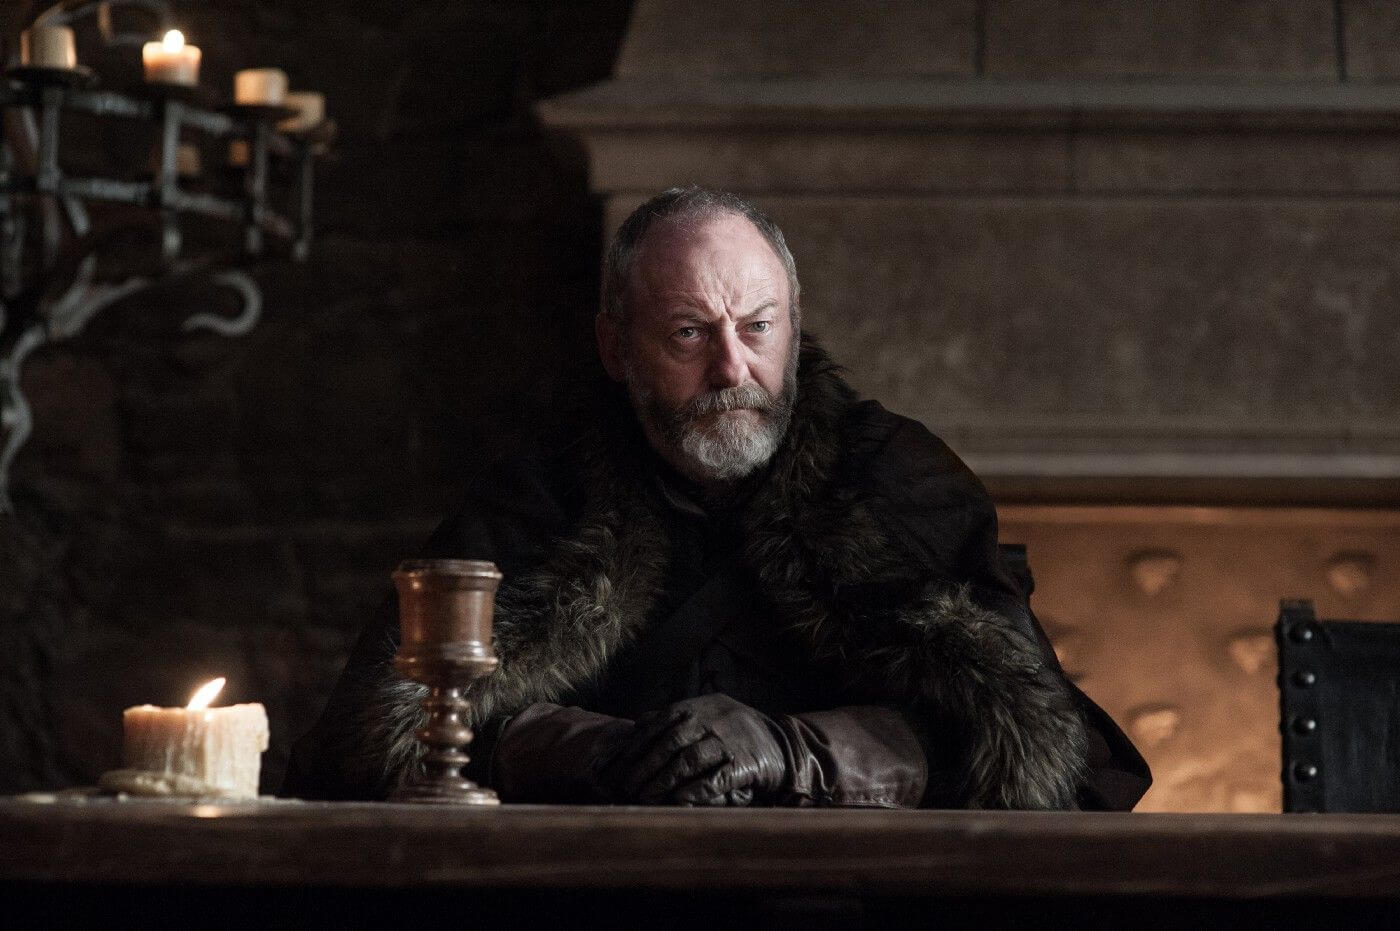 Davos Seaworth Game of Thrones